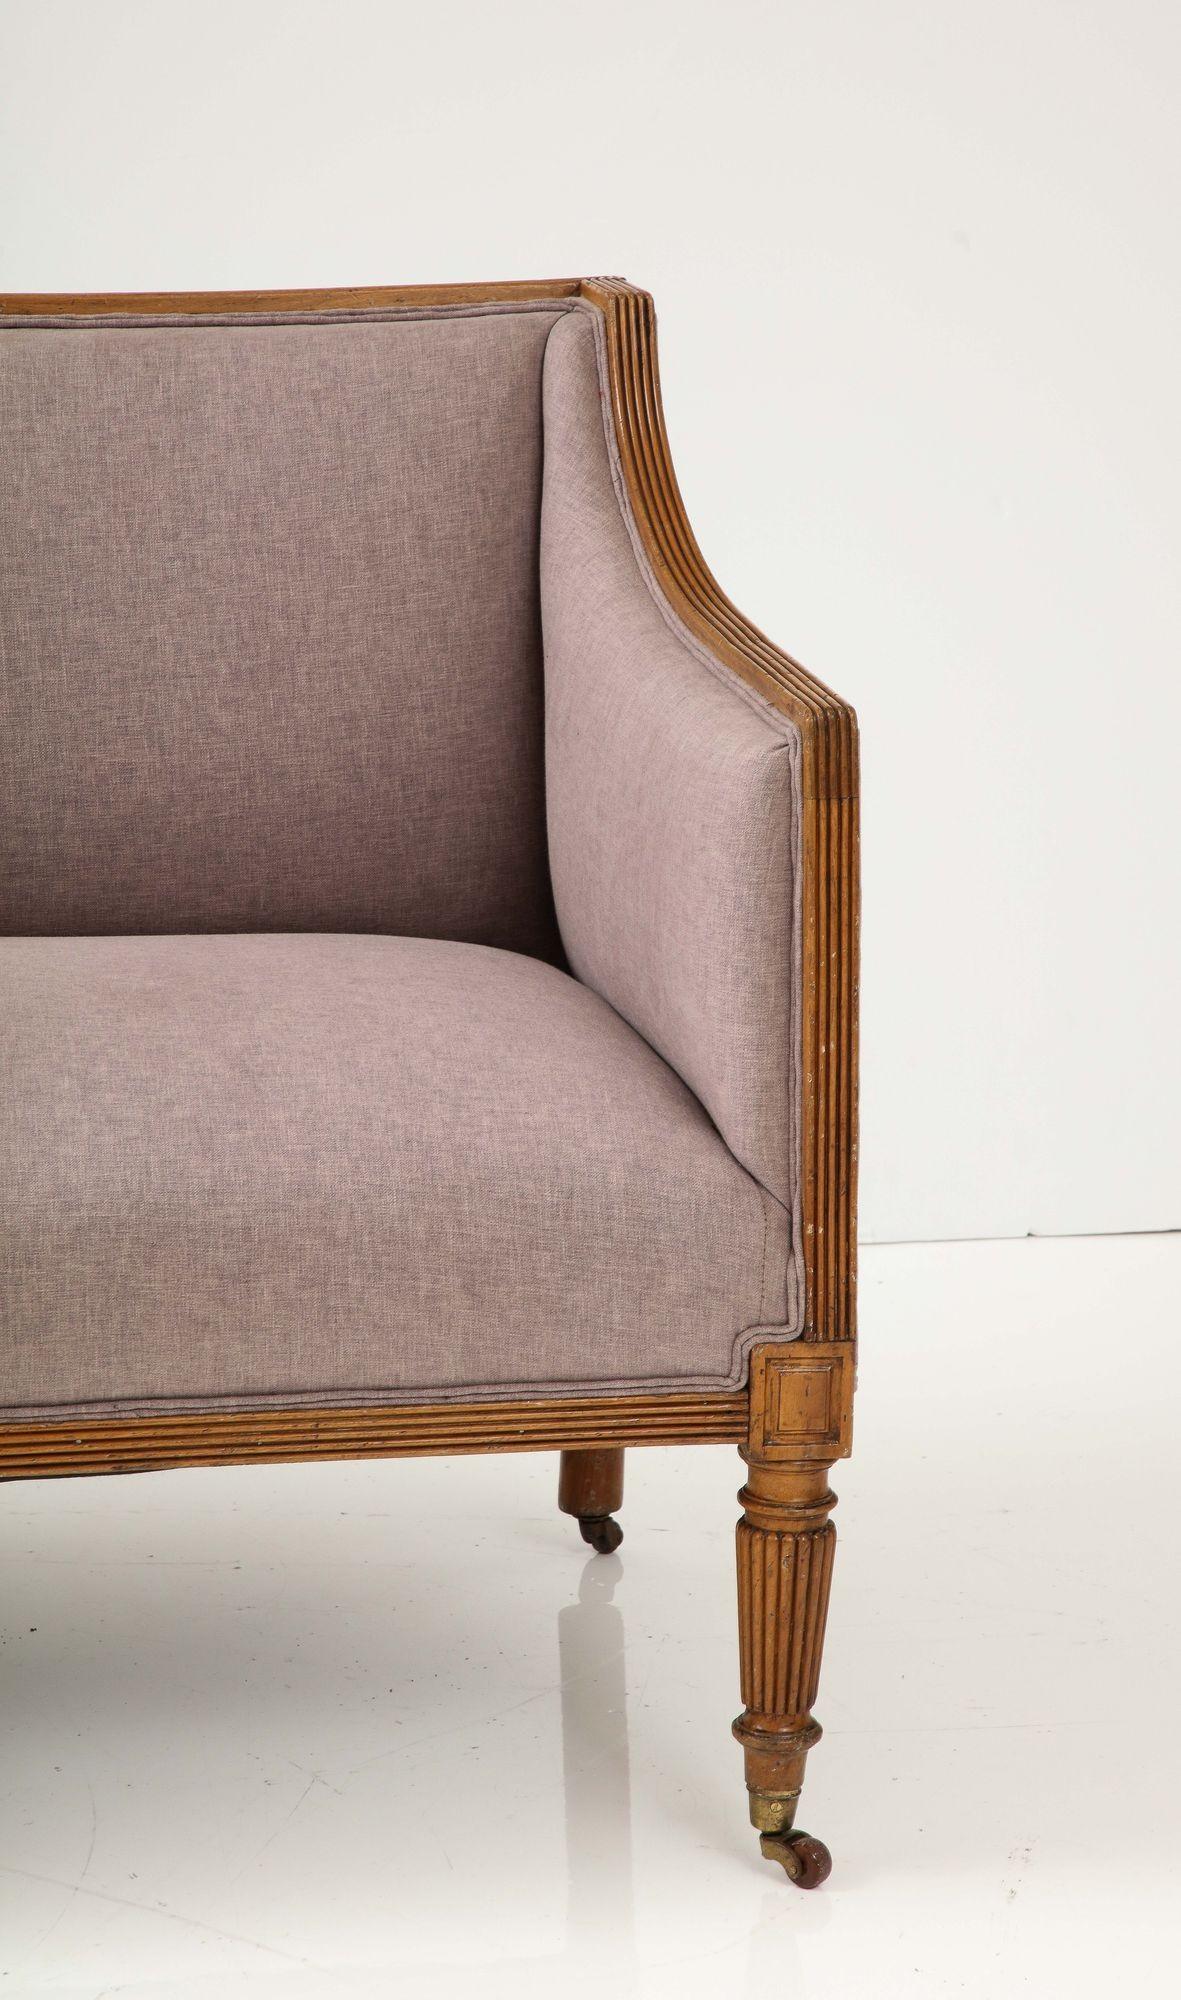 Experience the elegance of the English Regency era with this exquisite early 19th-century fruitwood square back loveseat. Adorned with classical sloping arms and a meticulously crafted reeded wood frame, it encapsulates the timeless charm of the